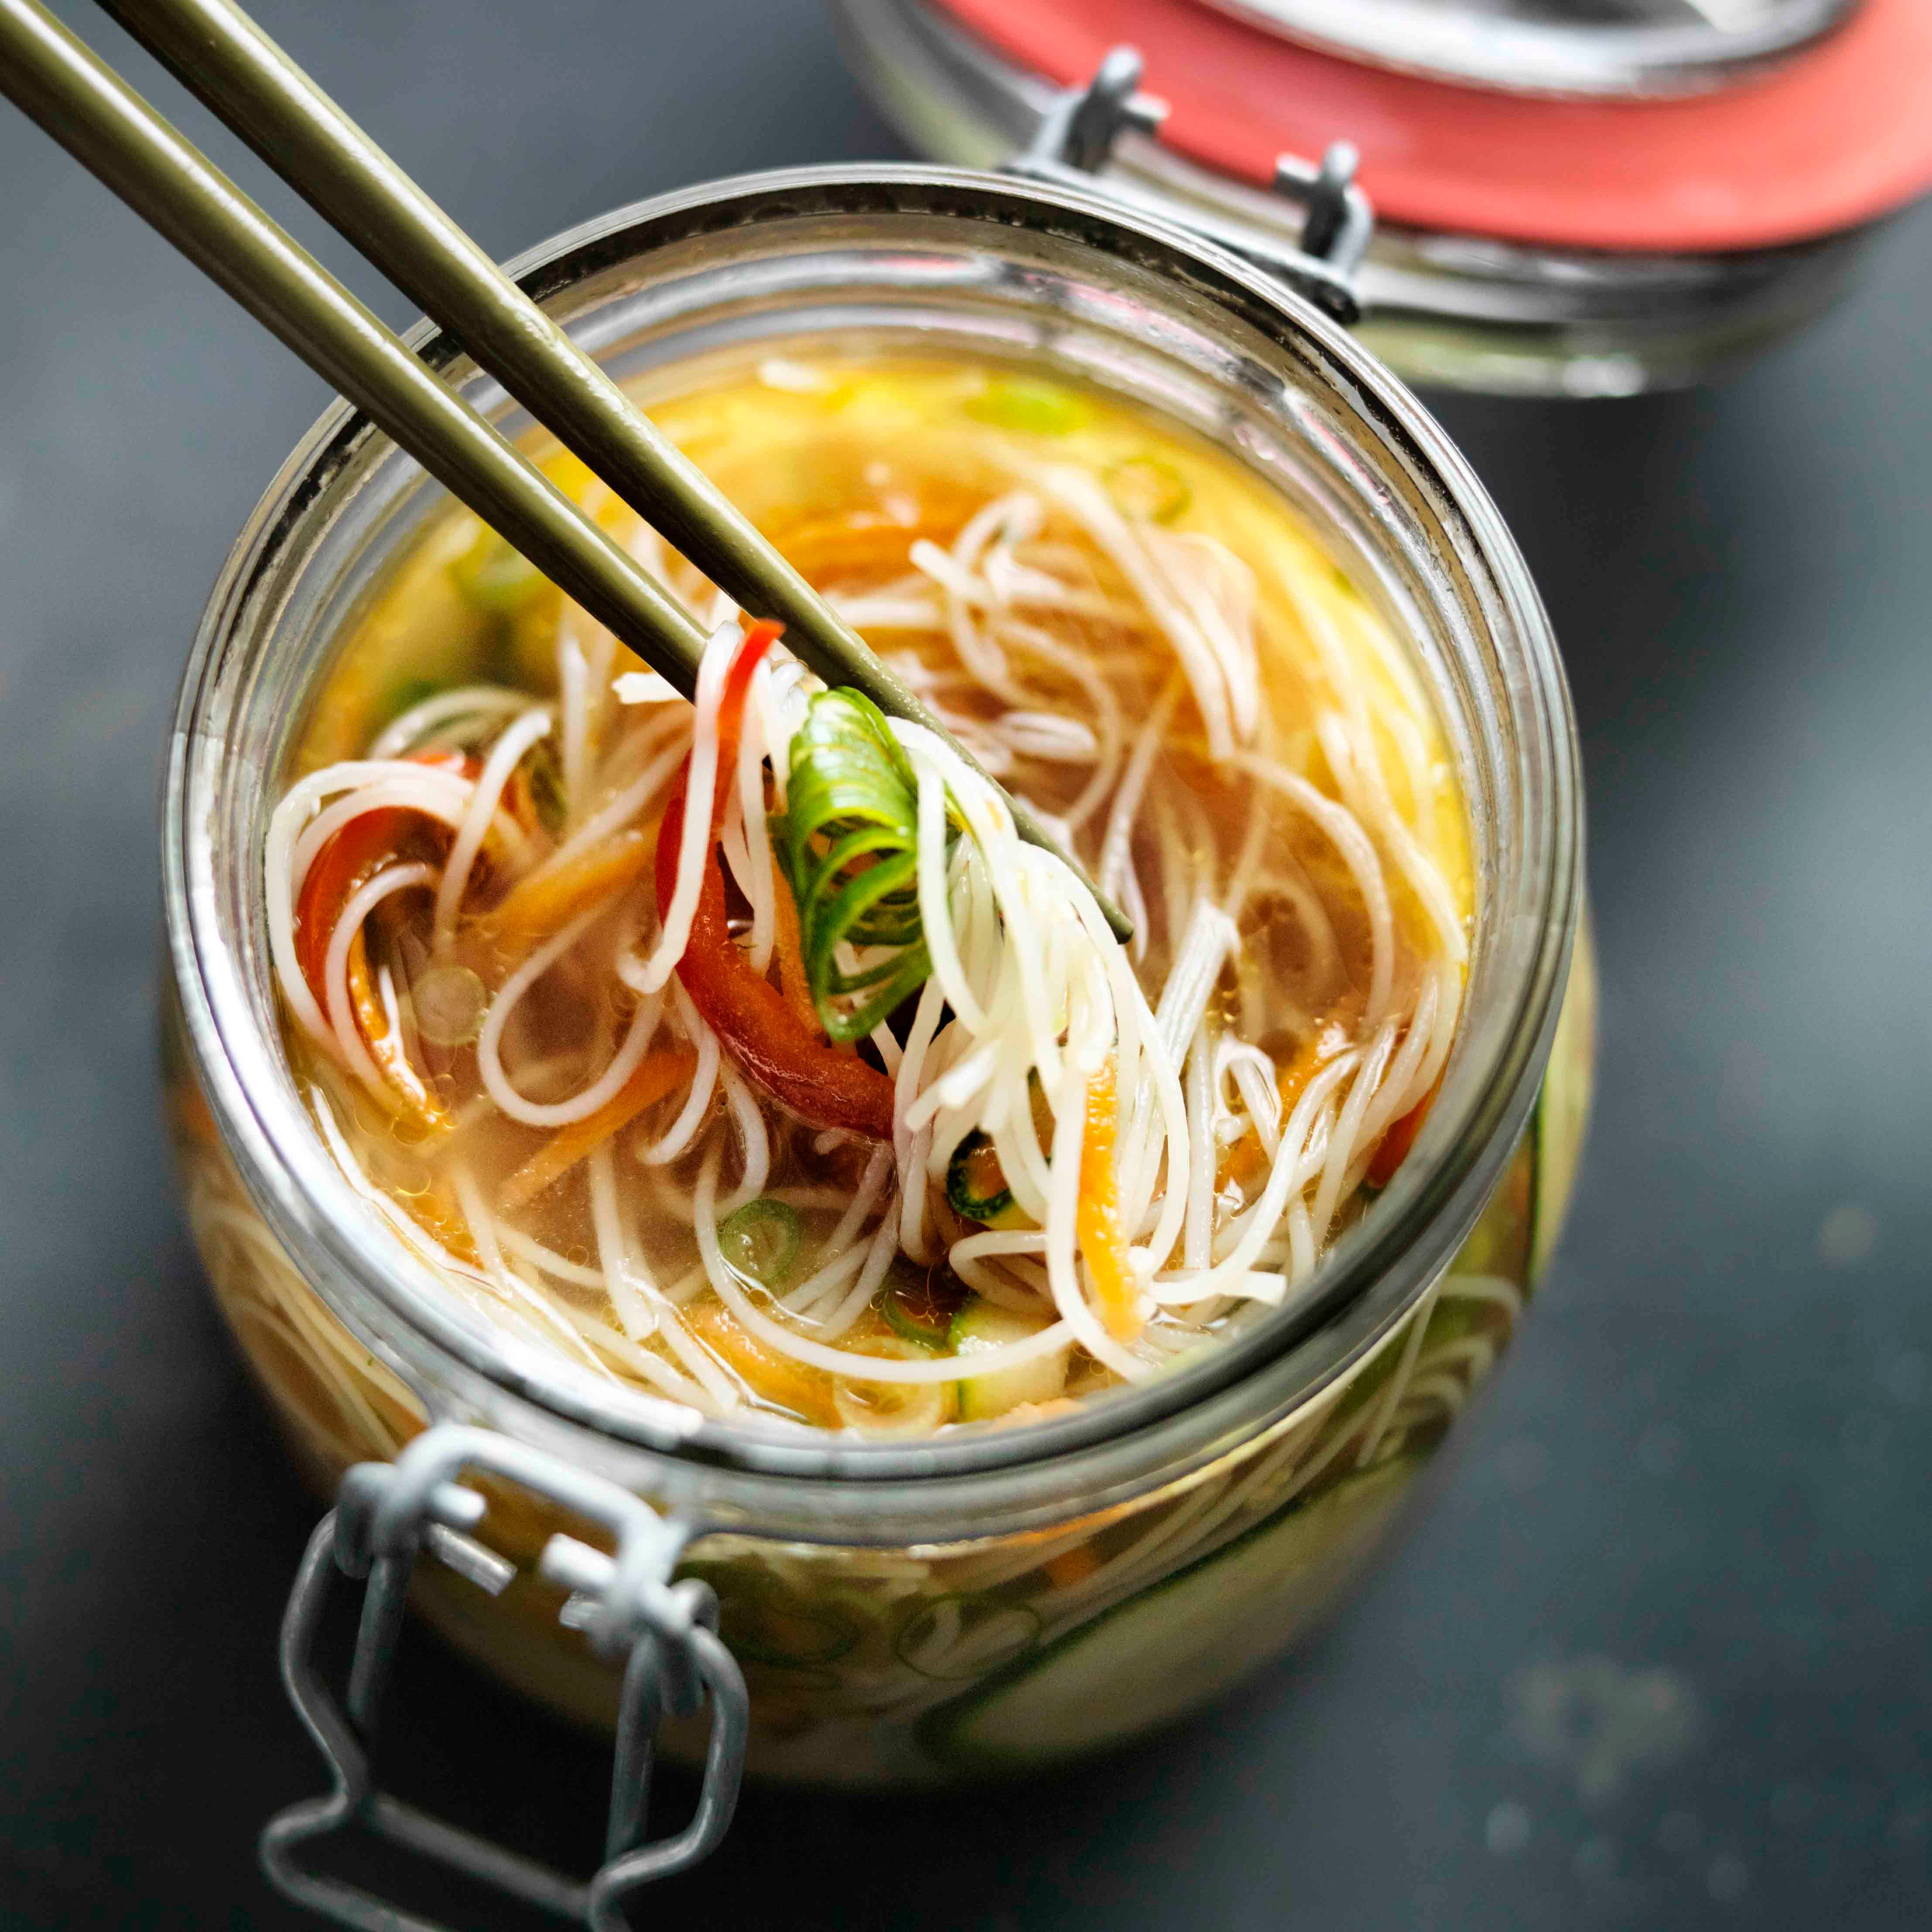 Photo of Instant noodle jars by WW